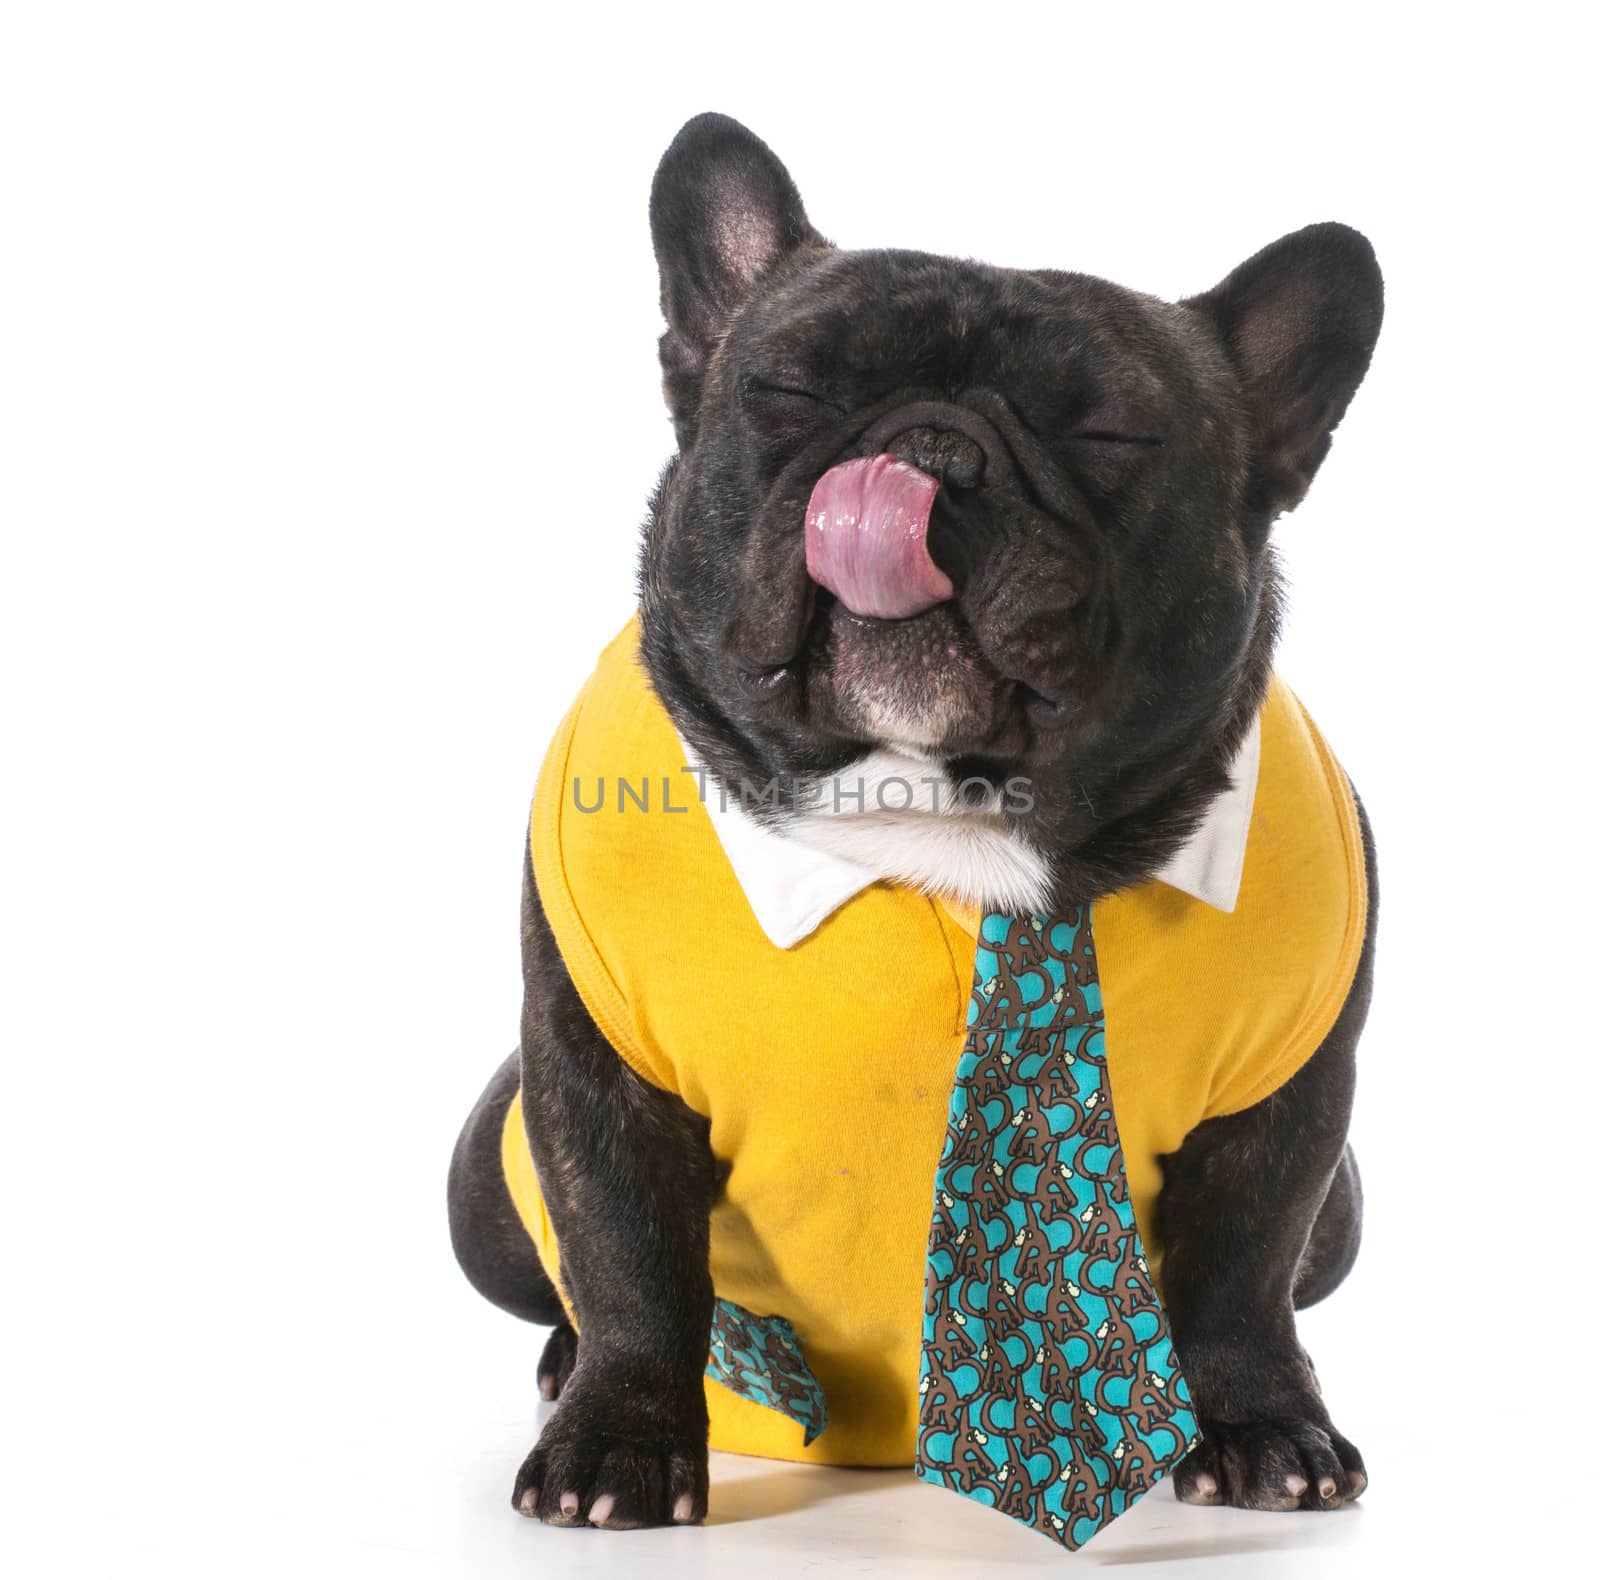 french bulldog wearing shirt and tie with silly expression